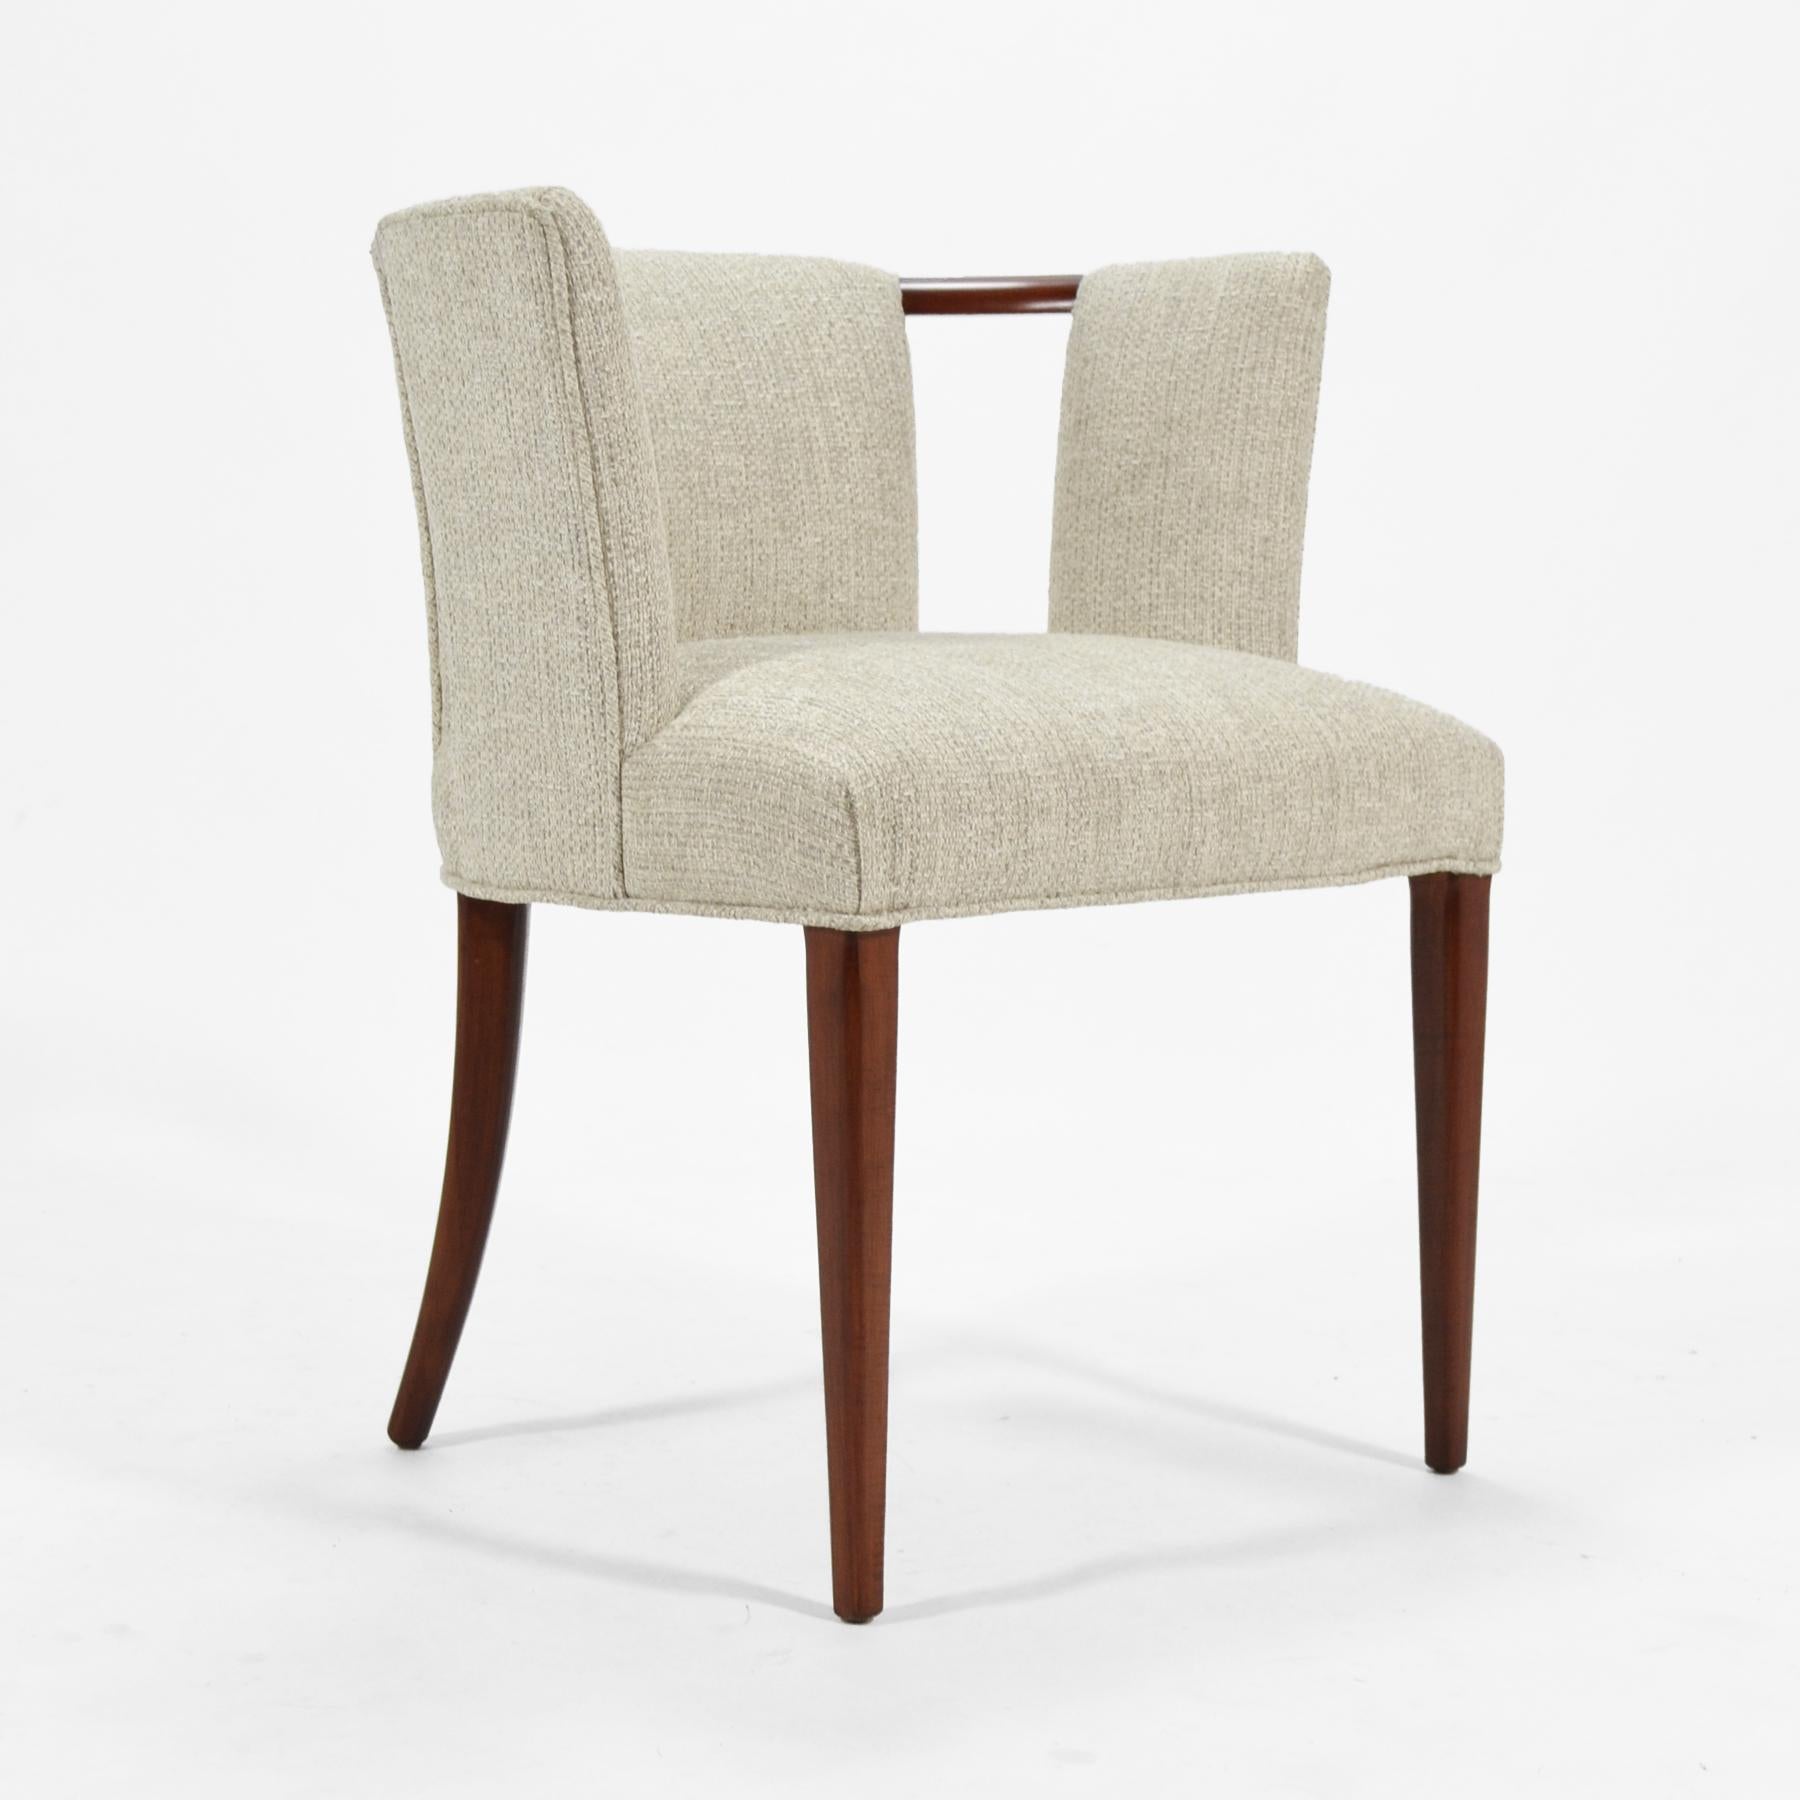 An elegant design by architect Eliel Saarinen with a segmented back/ arm design, the sculptural piece looks beautiful from every angle and serves as the perfect accent chair.